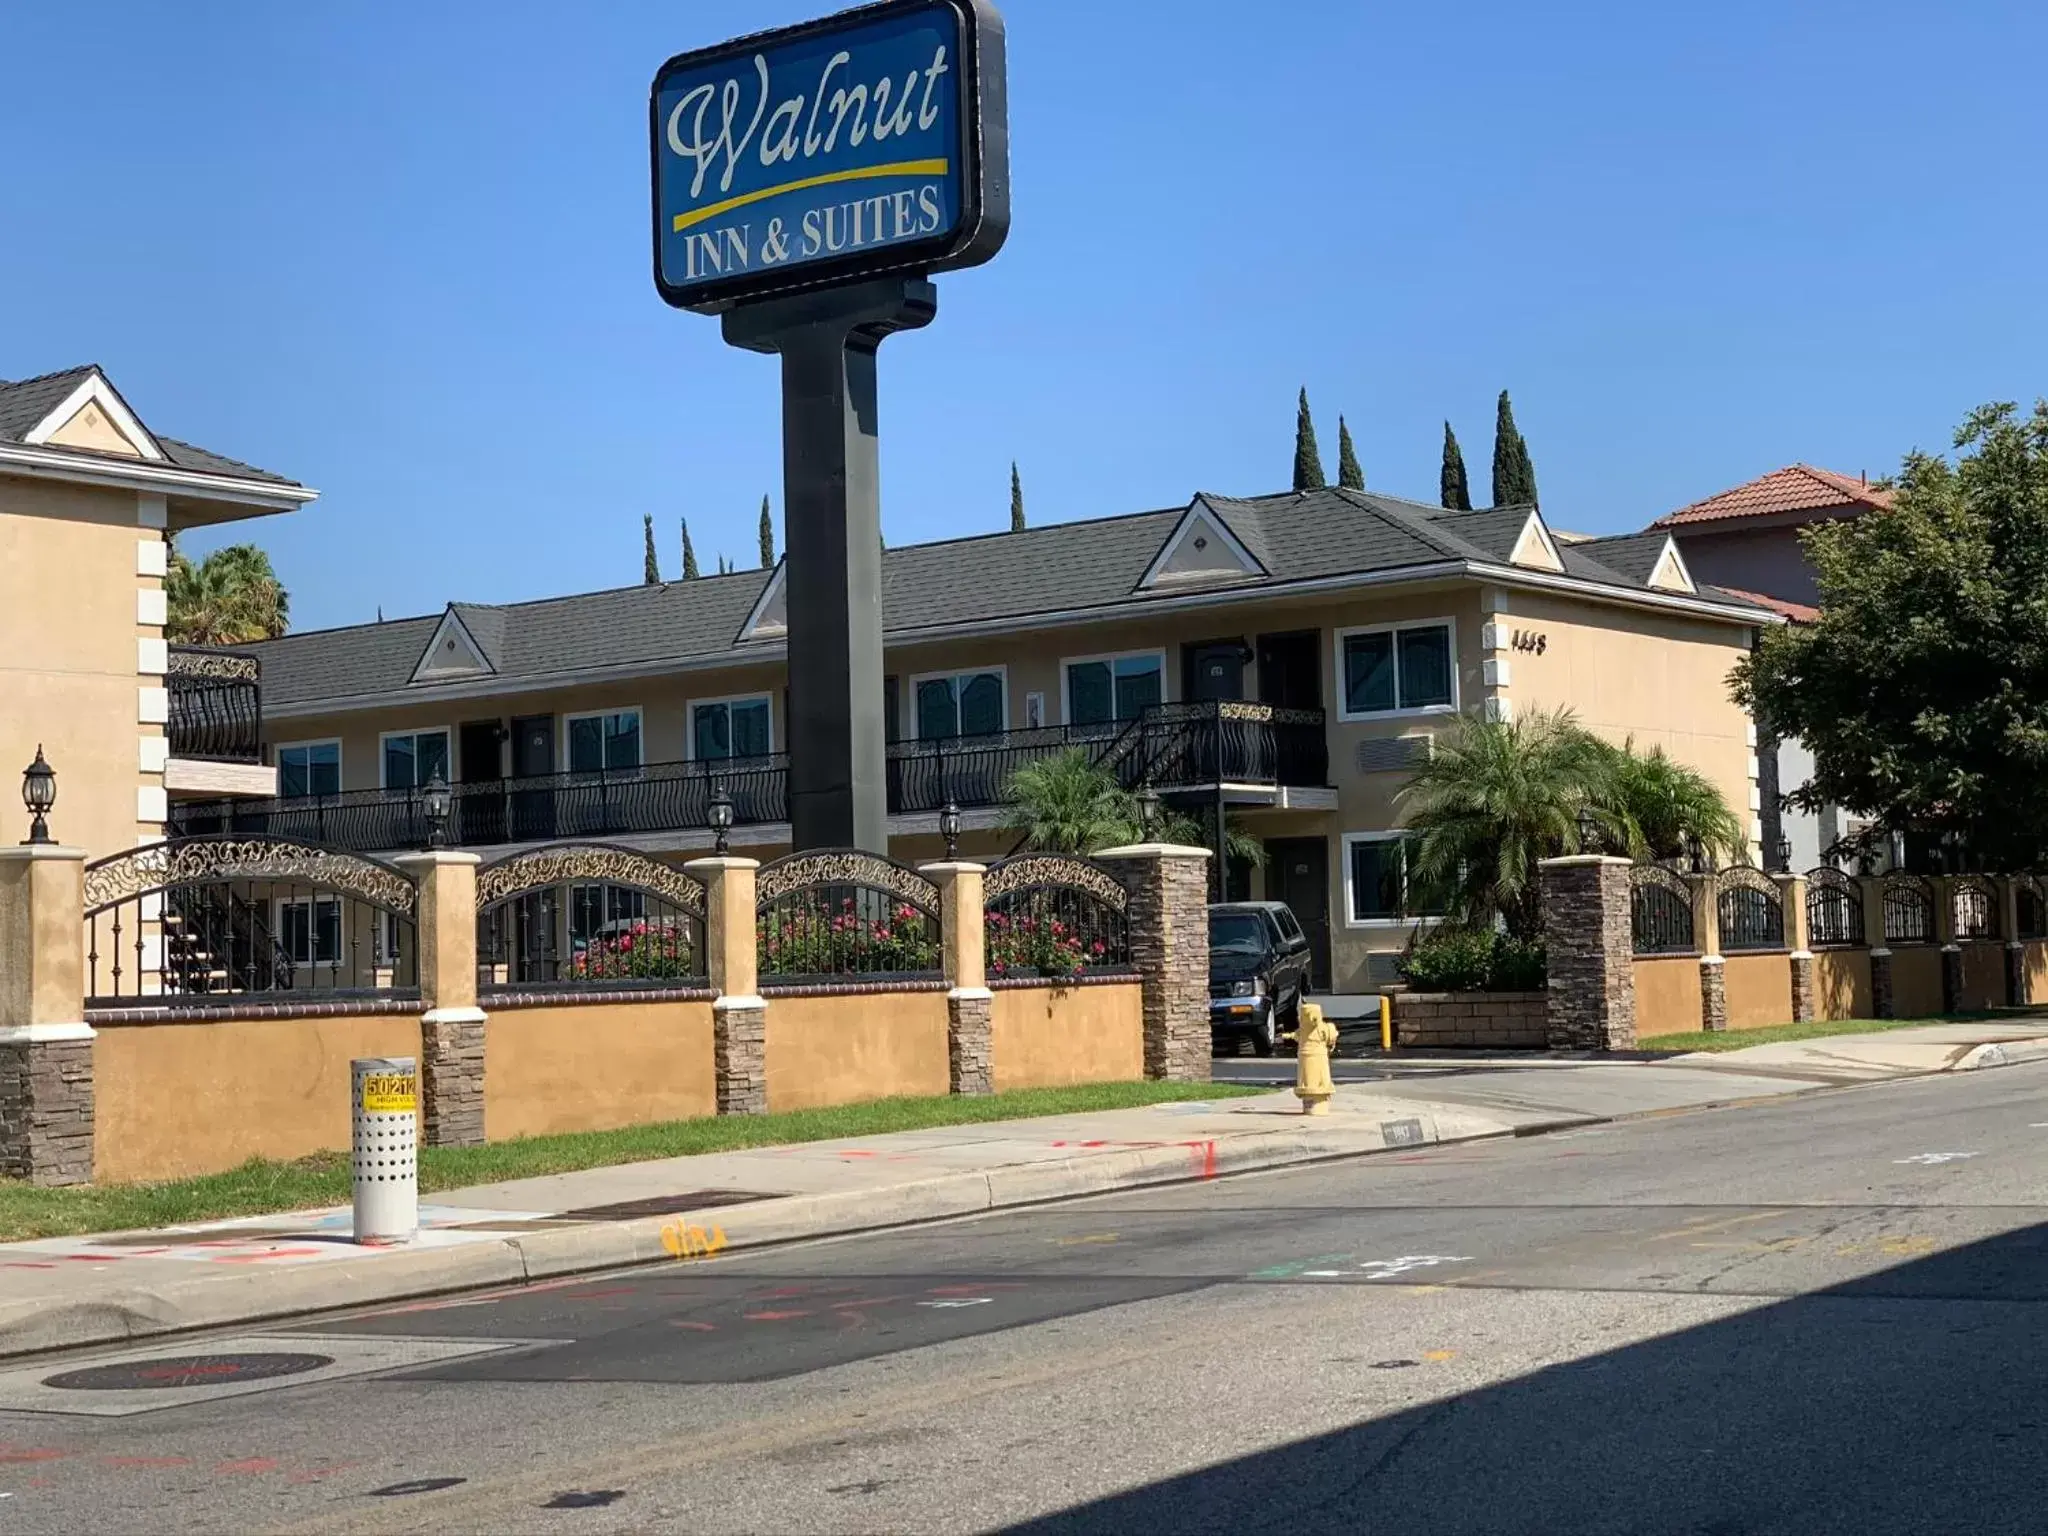 Street view, Property Building in Walnut Inn & Suites West Covina